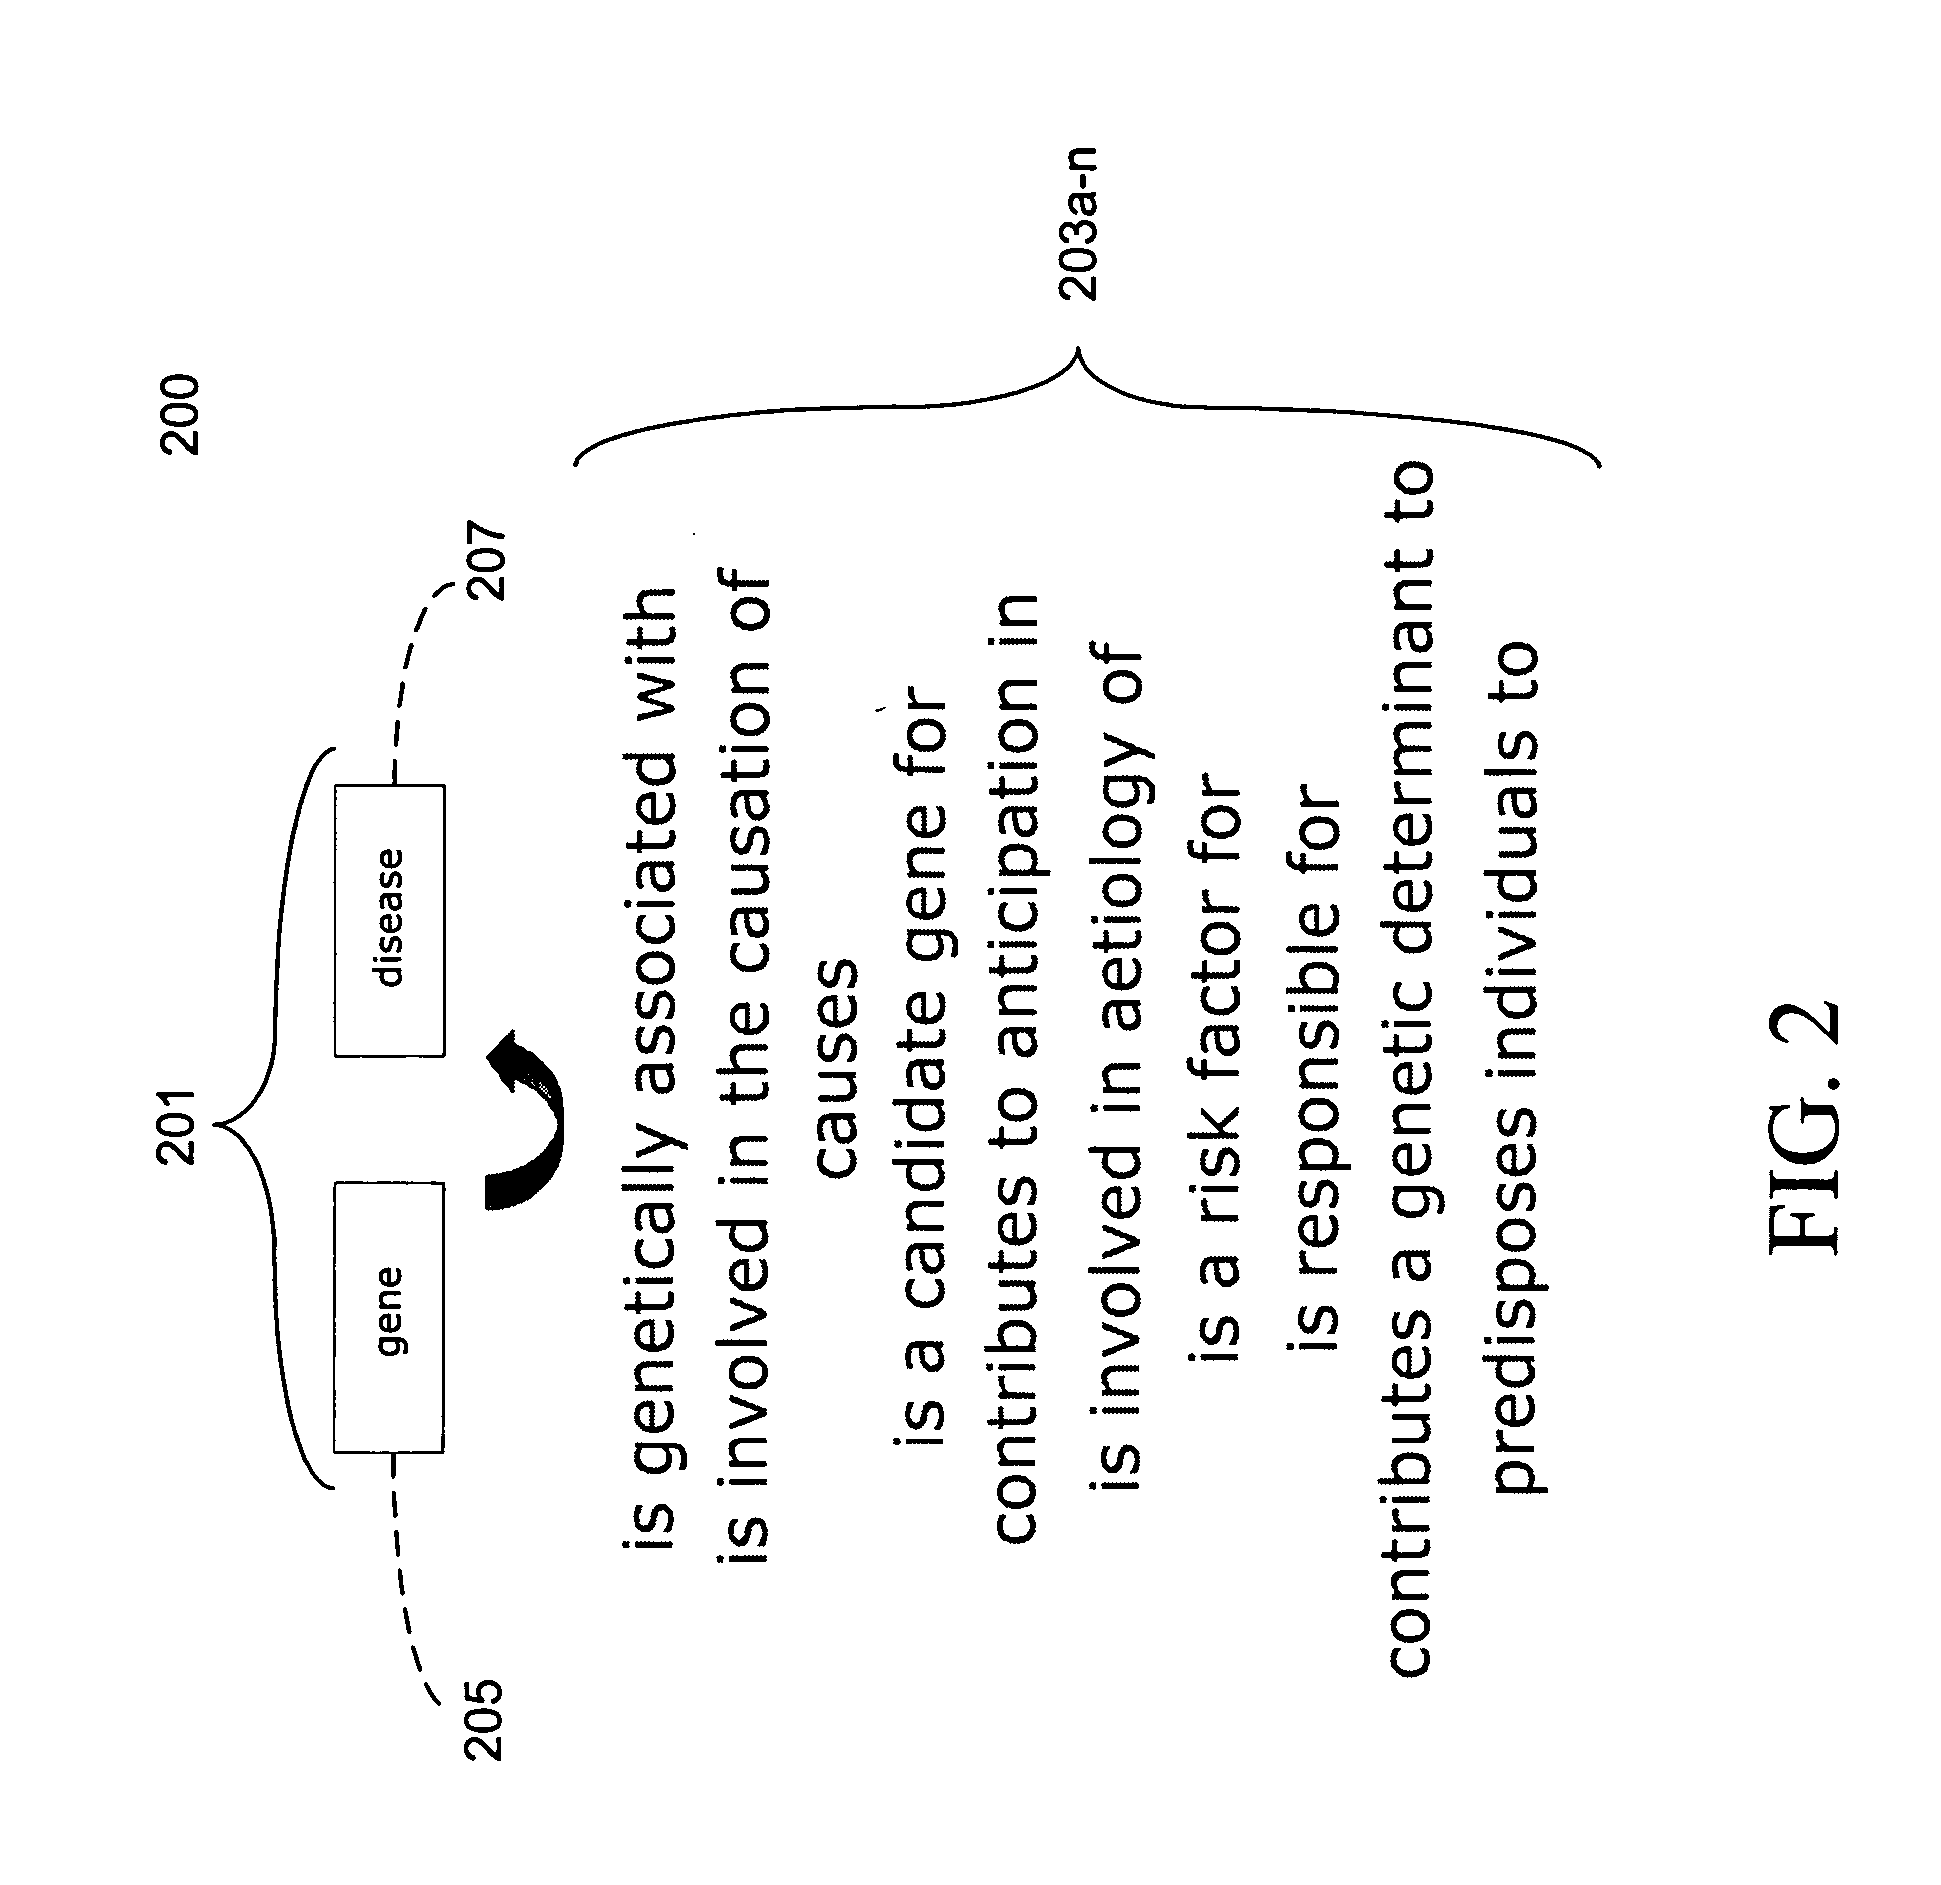 System and method for creating, editing, and using multi-relational ontologies